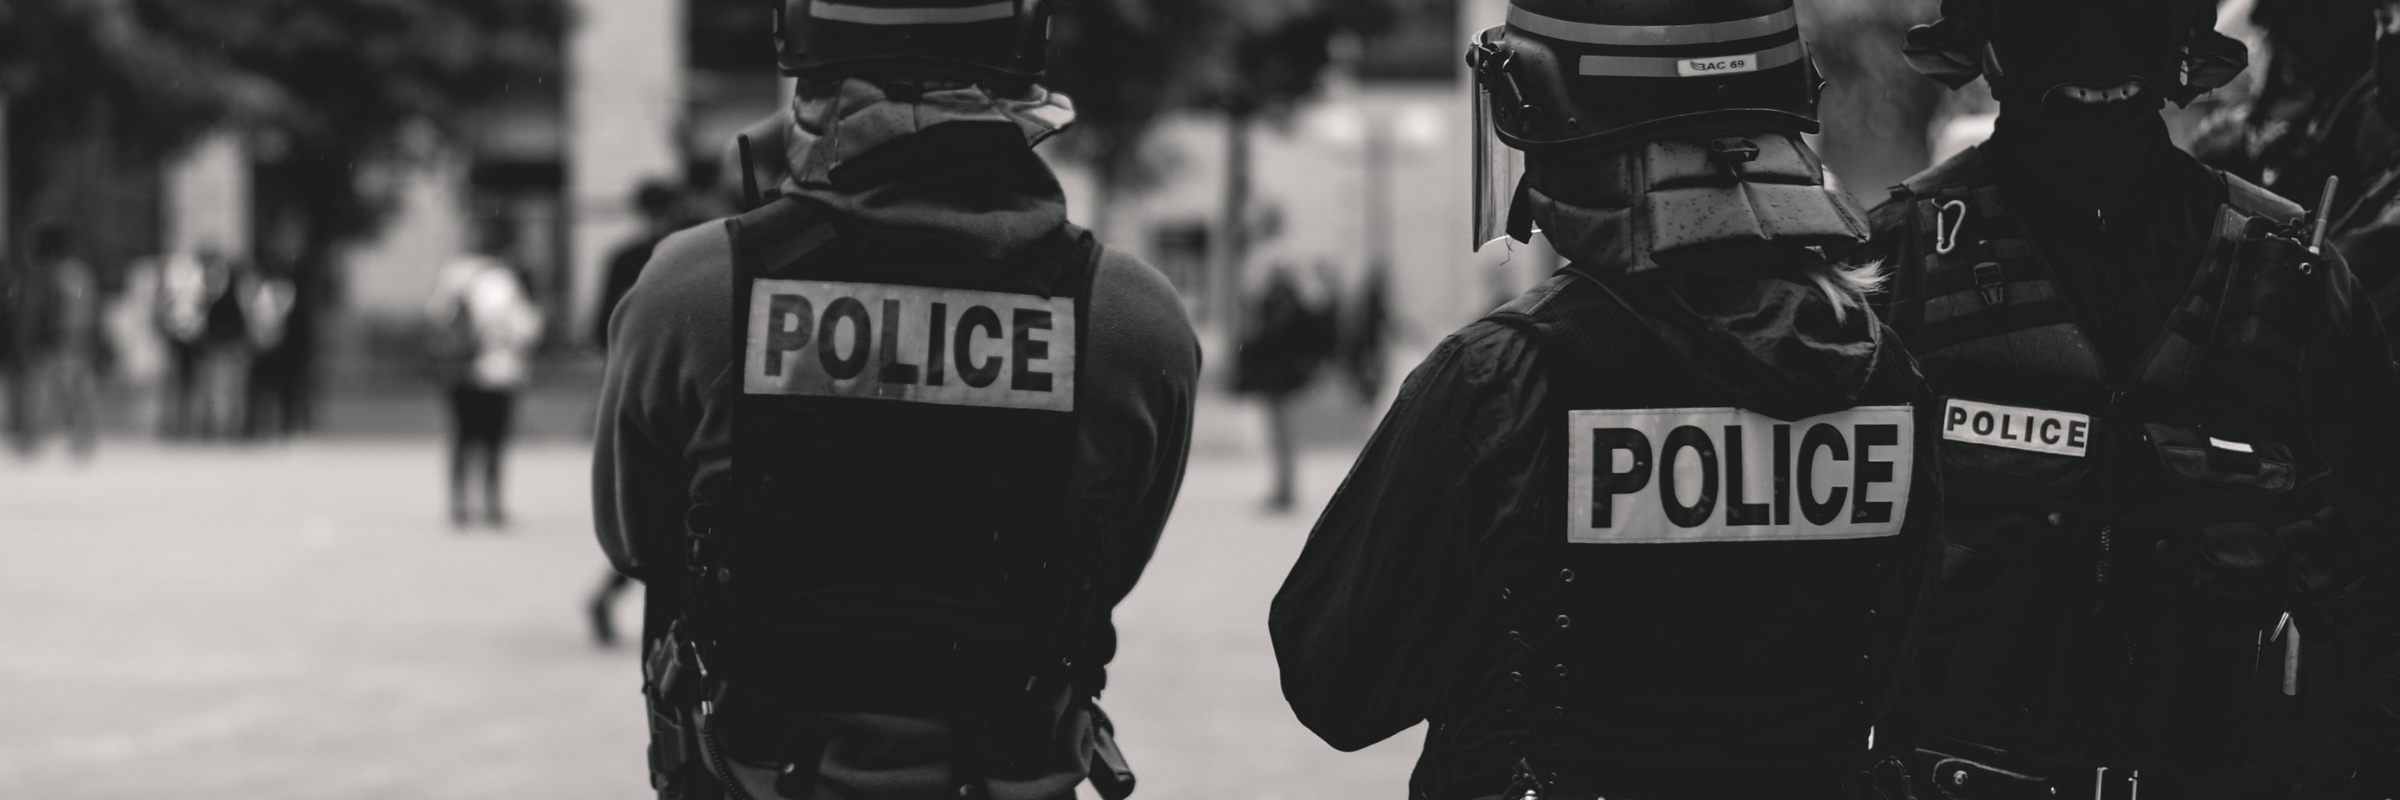 Black and white photo of police